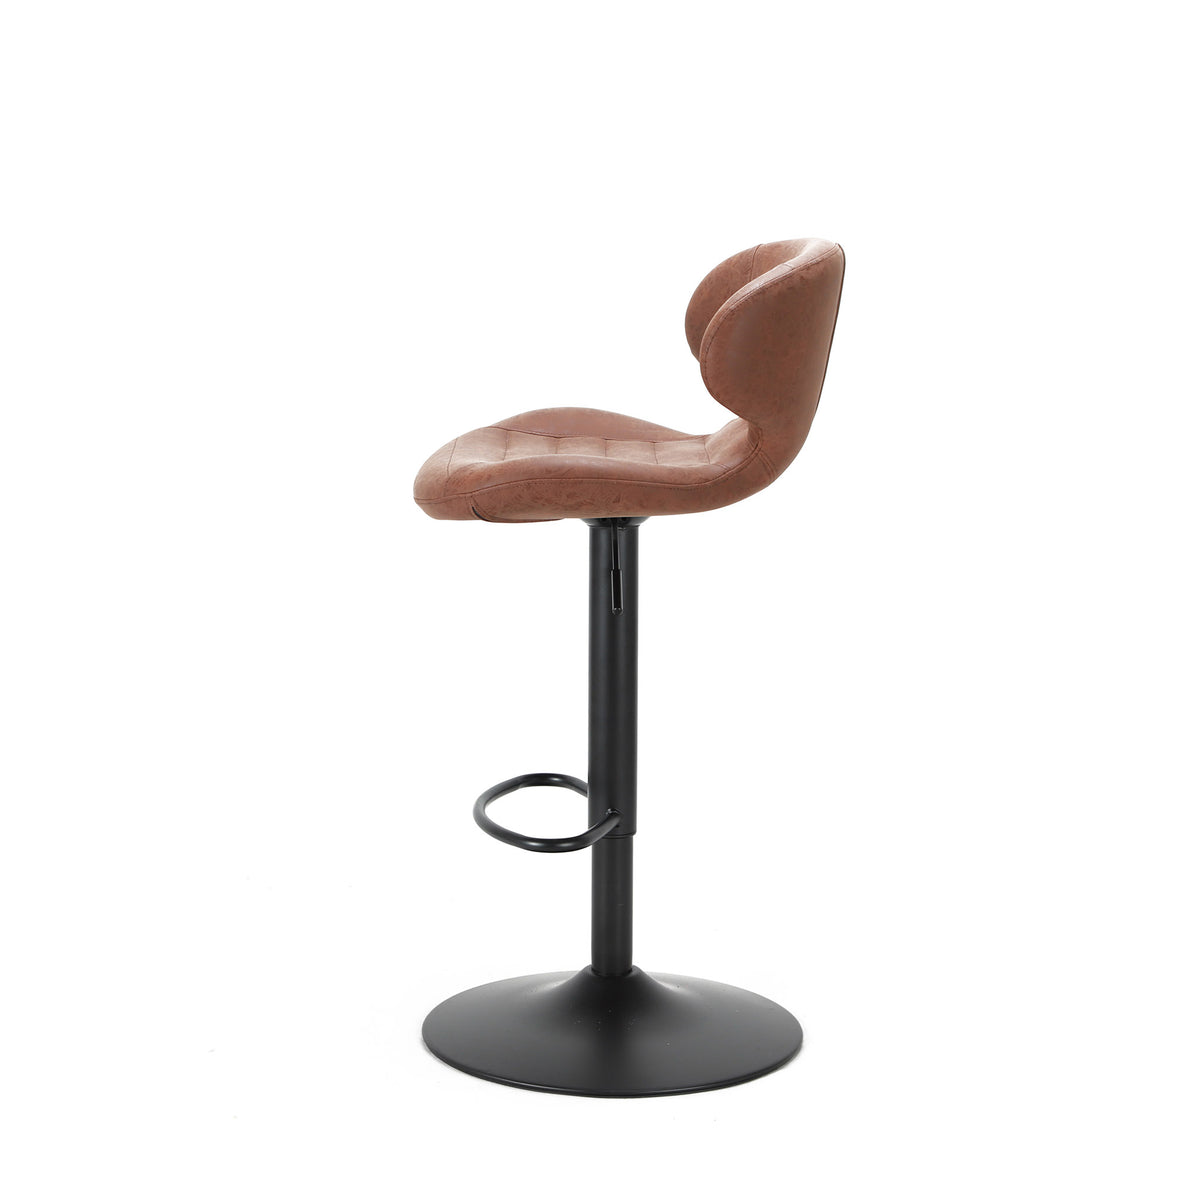 Mendez Tan Faux Leather Kitchen Breakfast Bar Stool with footrest